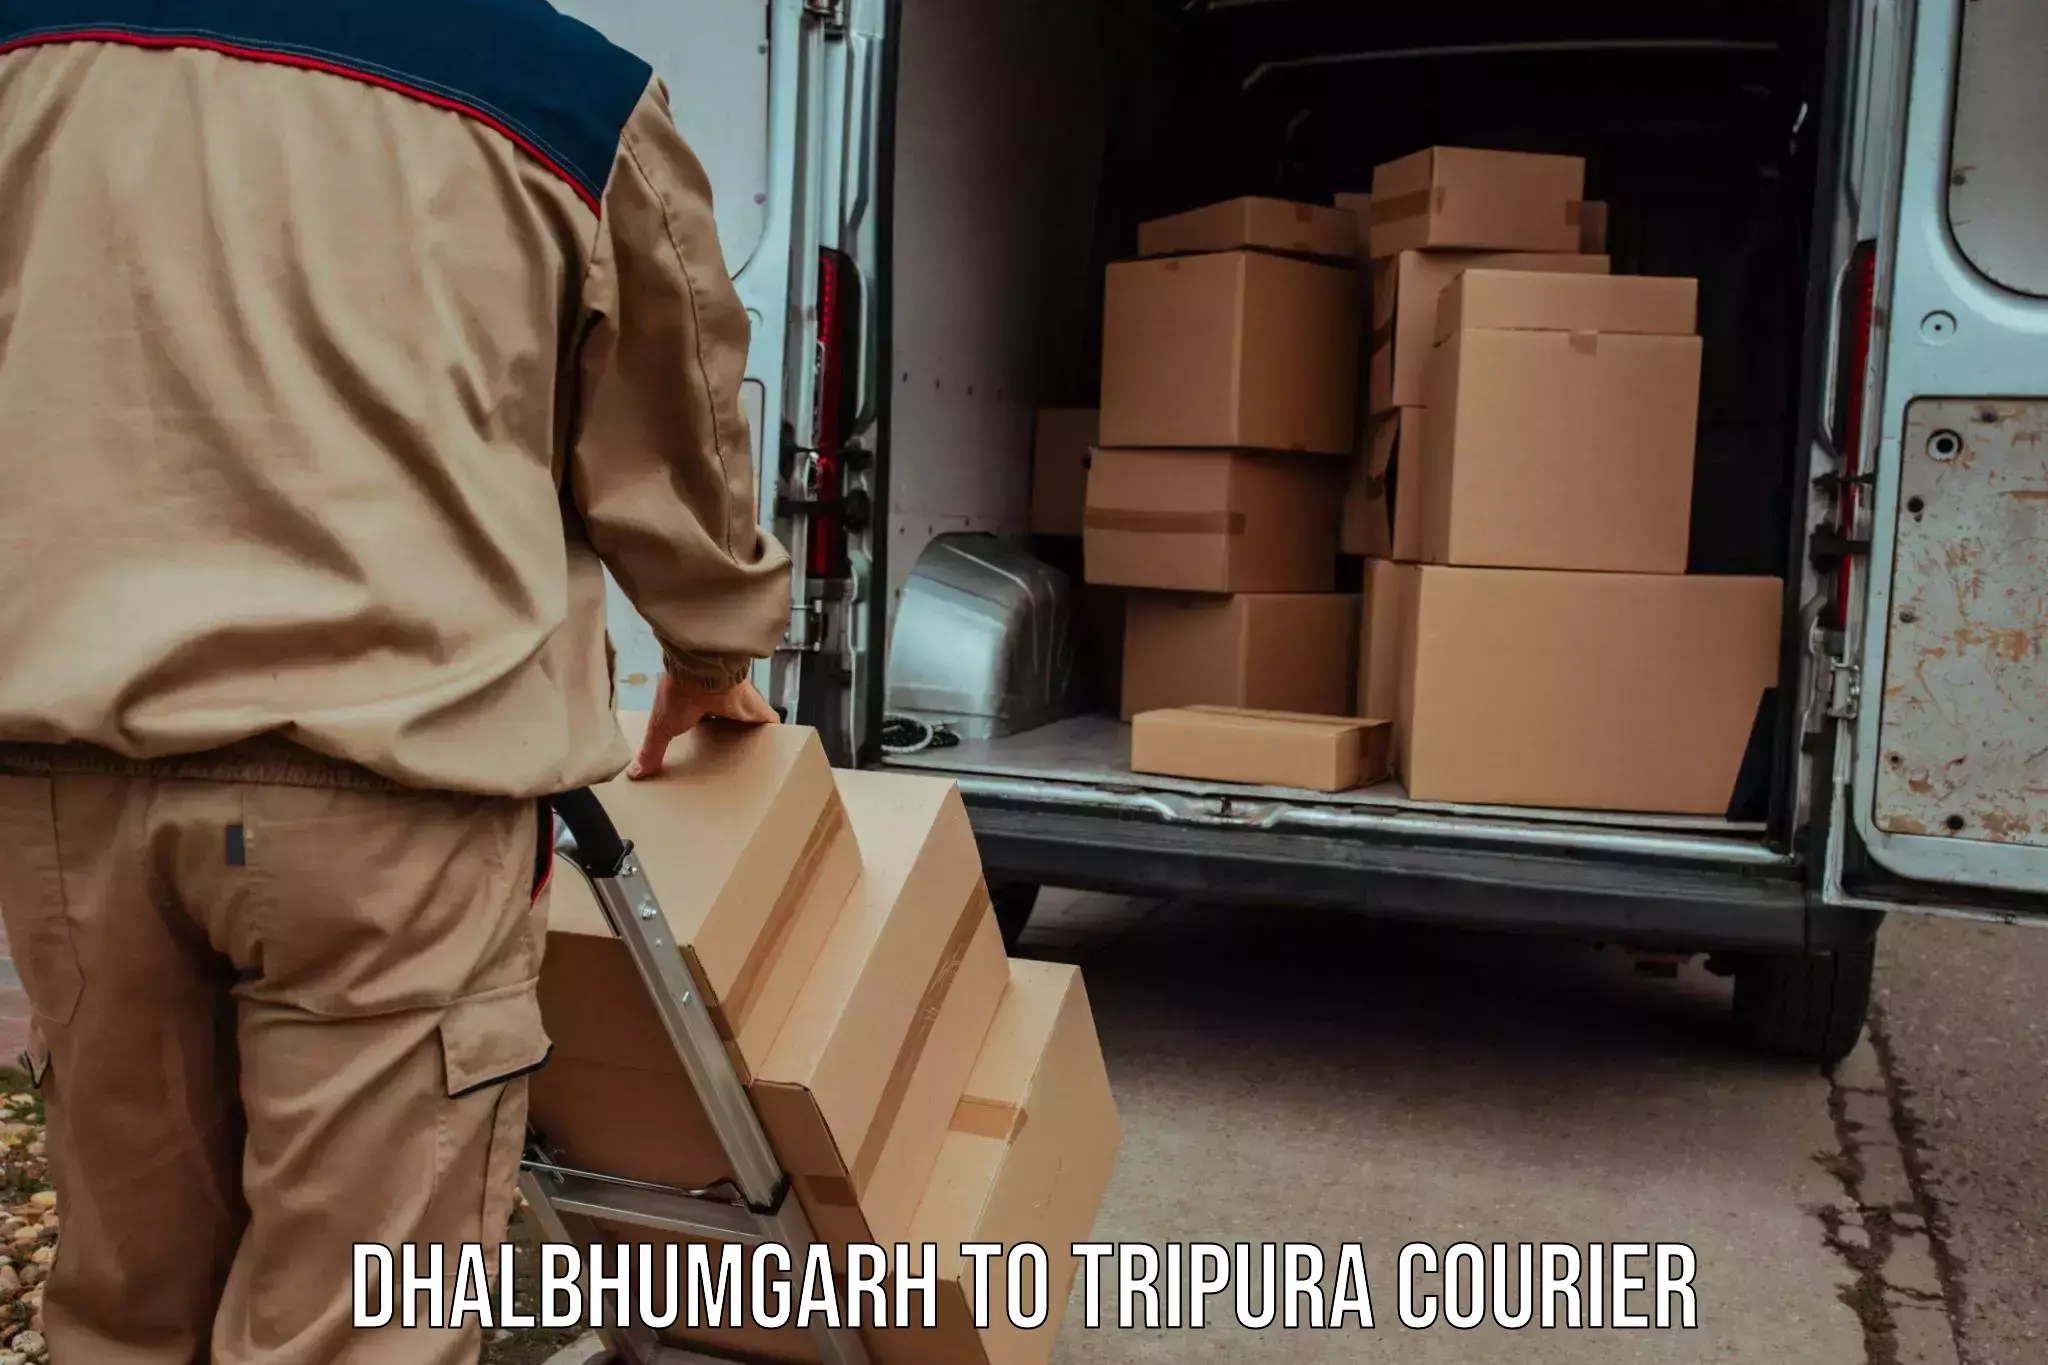 24-hour courier service Dhalbhumgarh to South Tripura